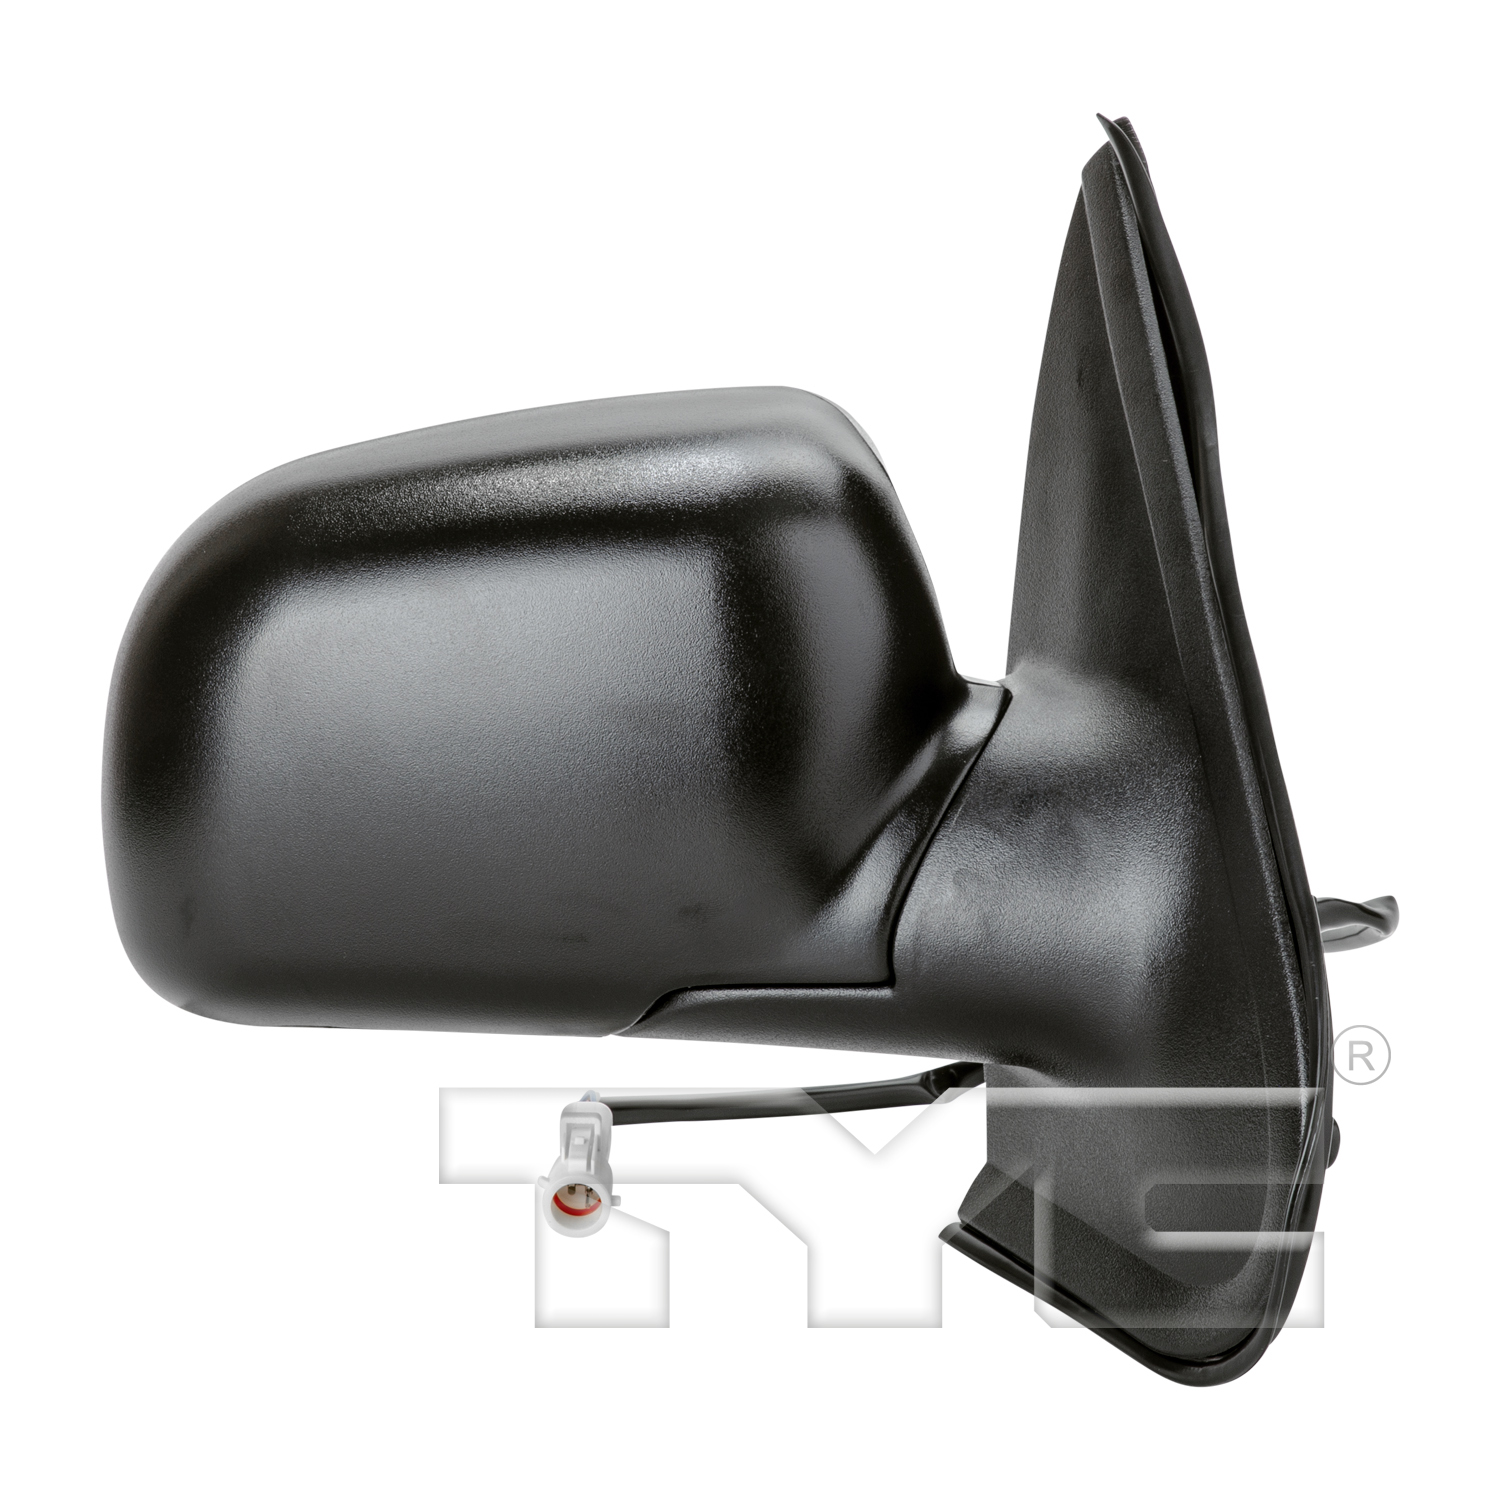 Aftermarket MIRRORS for FORD - EXPLORER, EXPLORER,95-01,RT Mirror outside rear view